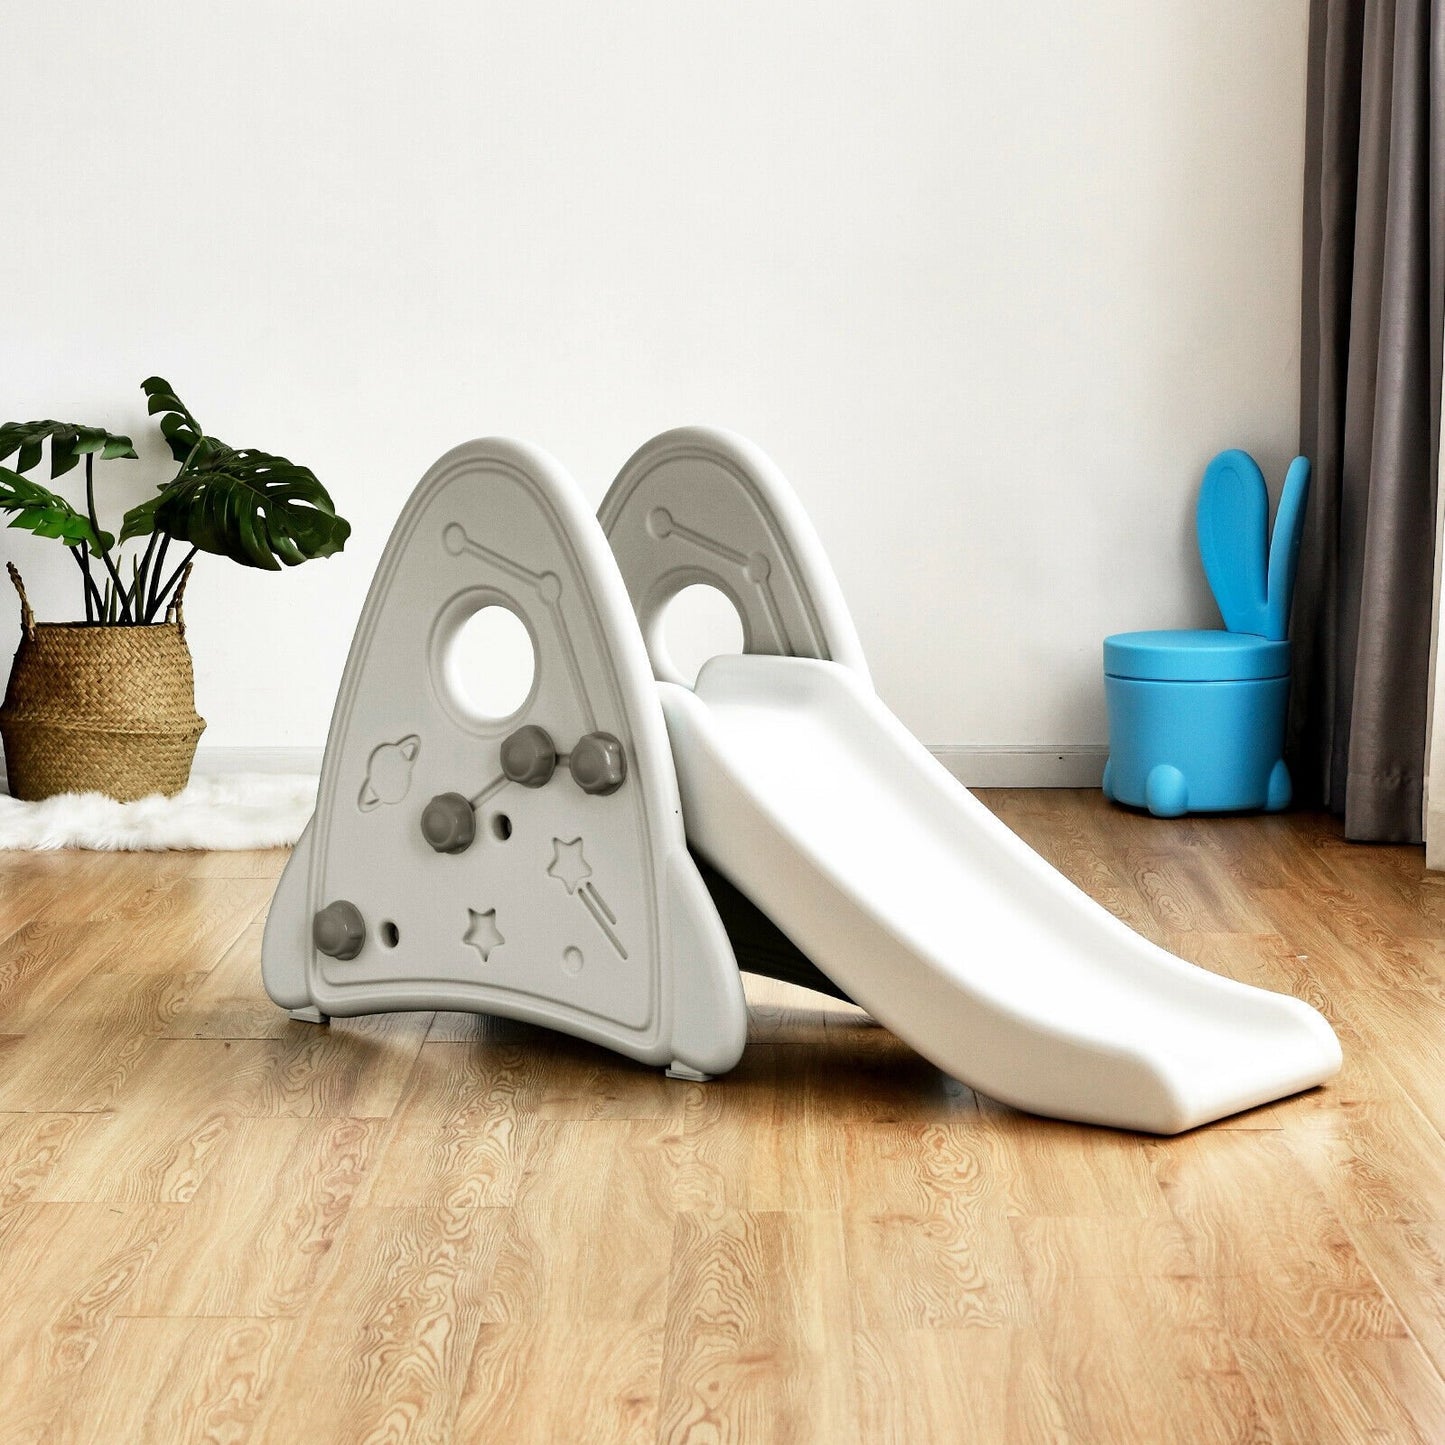 Freestanding Baby Slide Indoor First Play Climber Slide Set for Boys Girls, Gray - Gallery Canada